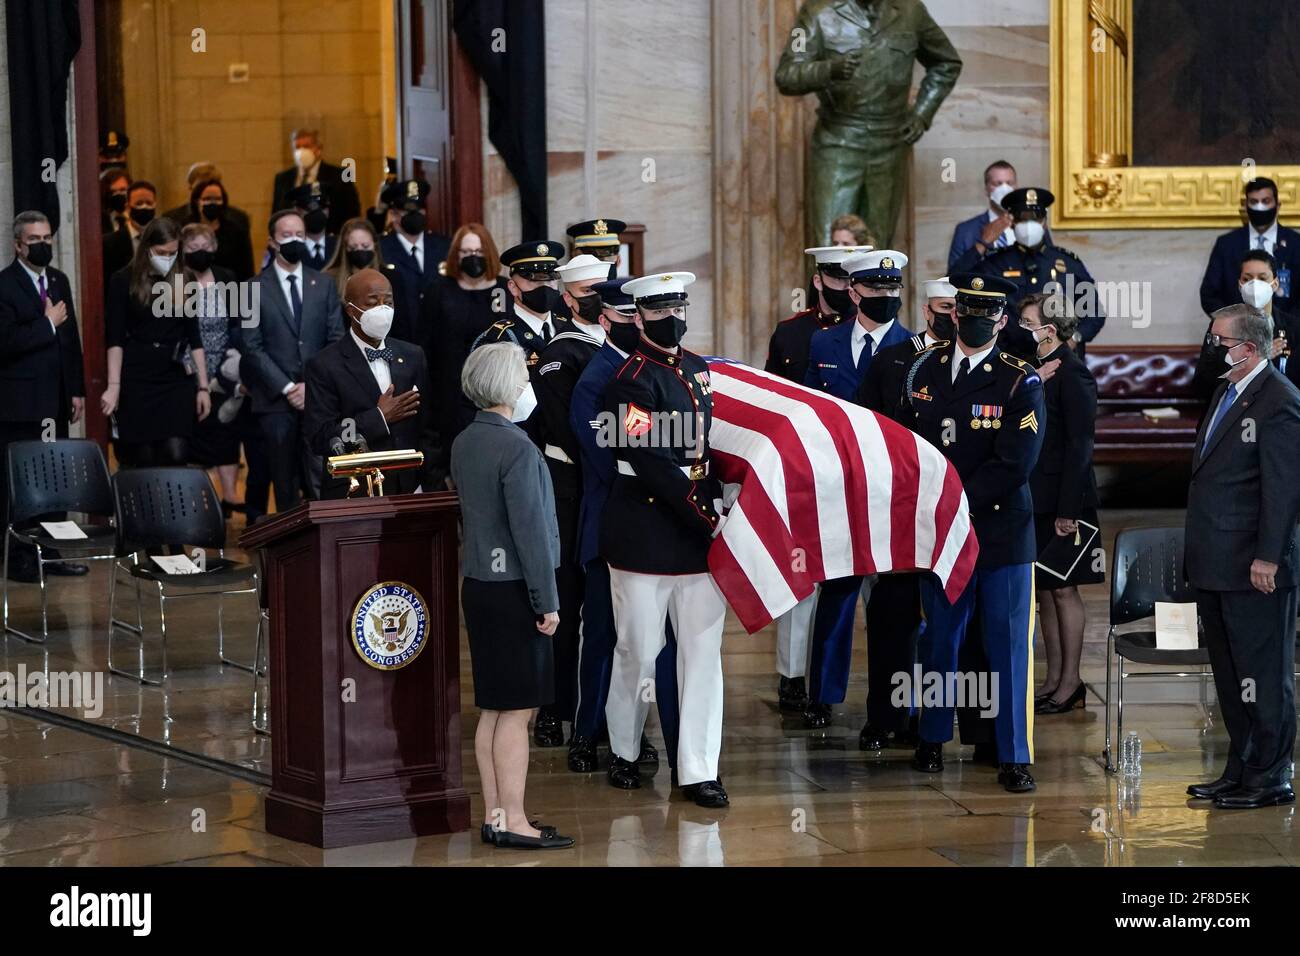 WASHINGTON, DC - APRIL 13: The remains of the late U.S. Capitol Police officer William 'Billy' Evans arrive for a memorial service as he lies in honor in the Rotunda at the U.S. Capitol on April 13, 2021 in Washington, DC. Officer Evans was killed in the line of duty during the attack outside the U.S. Capitol on April 2. He is the sixth Capitol Police officer to die in the line of duty in the nearly 200 years since the force was created.Credit: Drew Angerer/Pool via CNP | usage worldwide Stock Photo